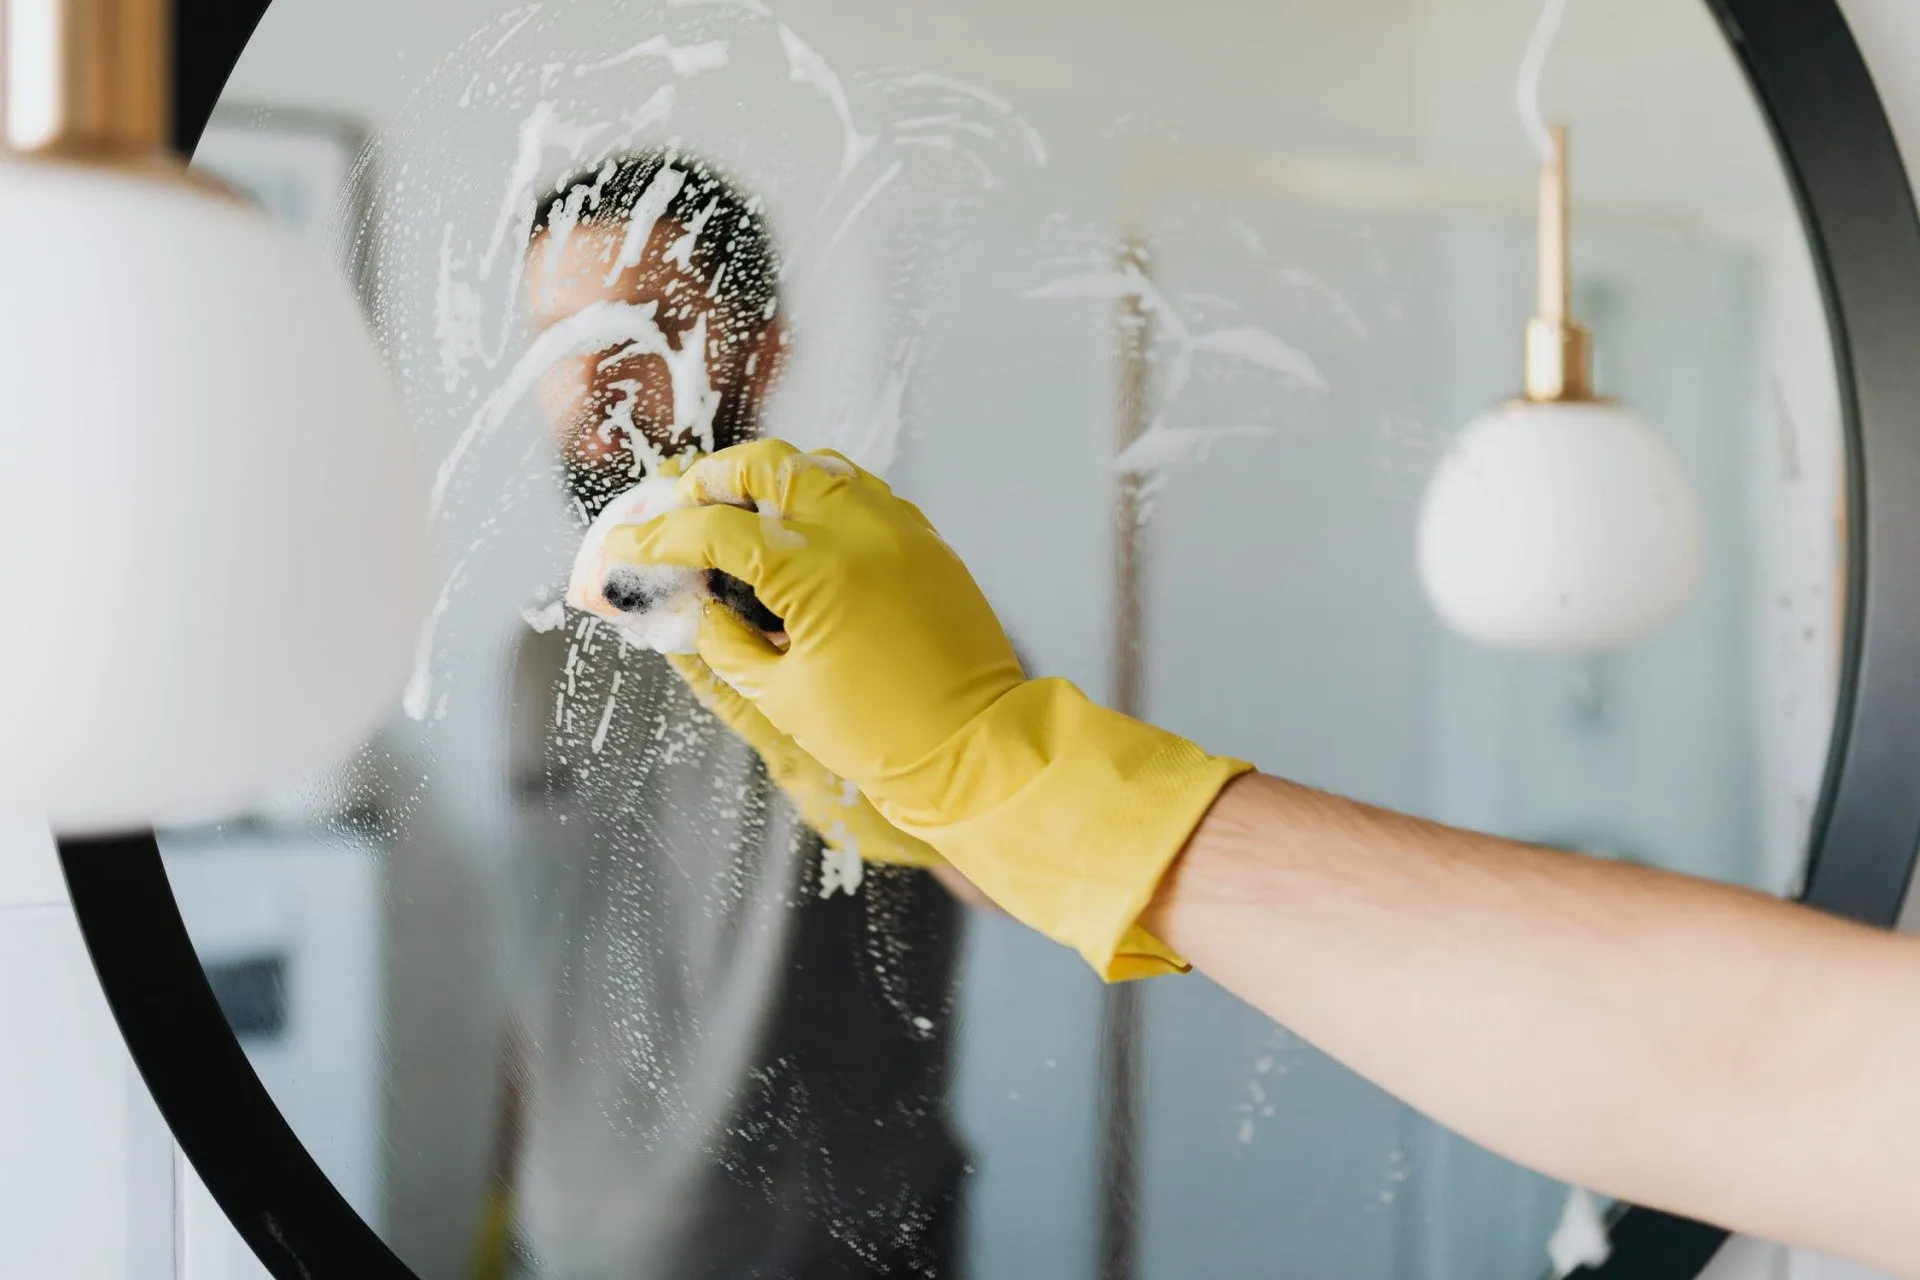 A person's hand in a yellow cleaning glove is wiping soapy suds on a mirror, reflecting their blurred image, with a pendant light visible in the background.